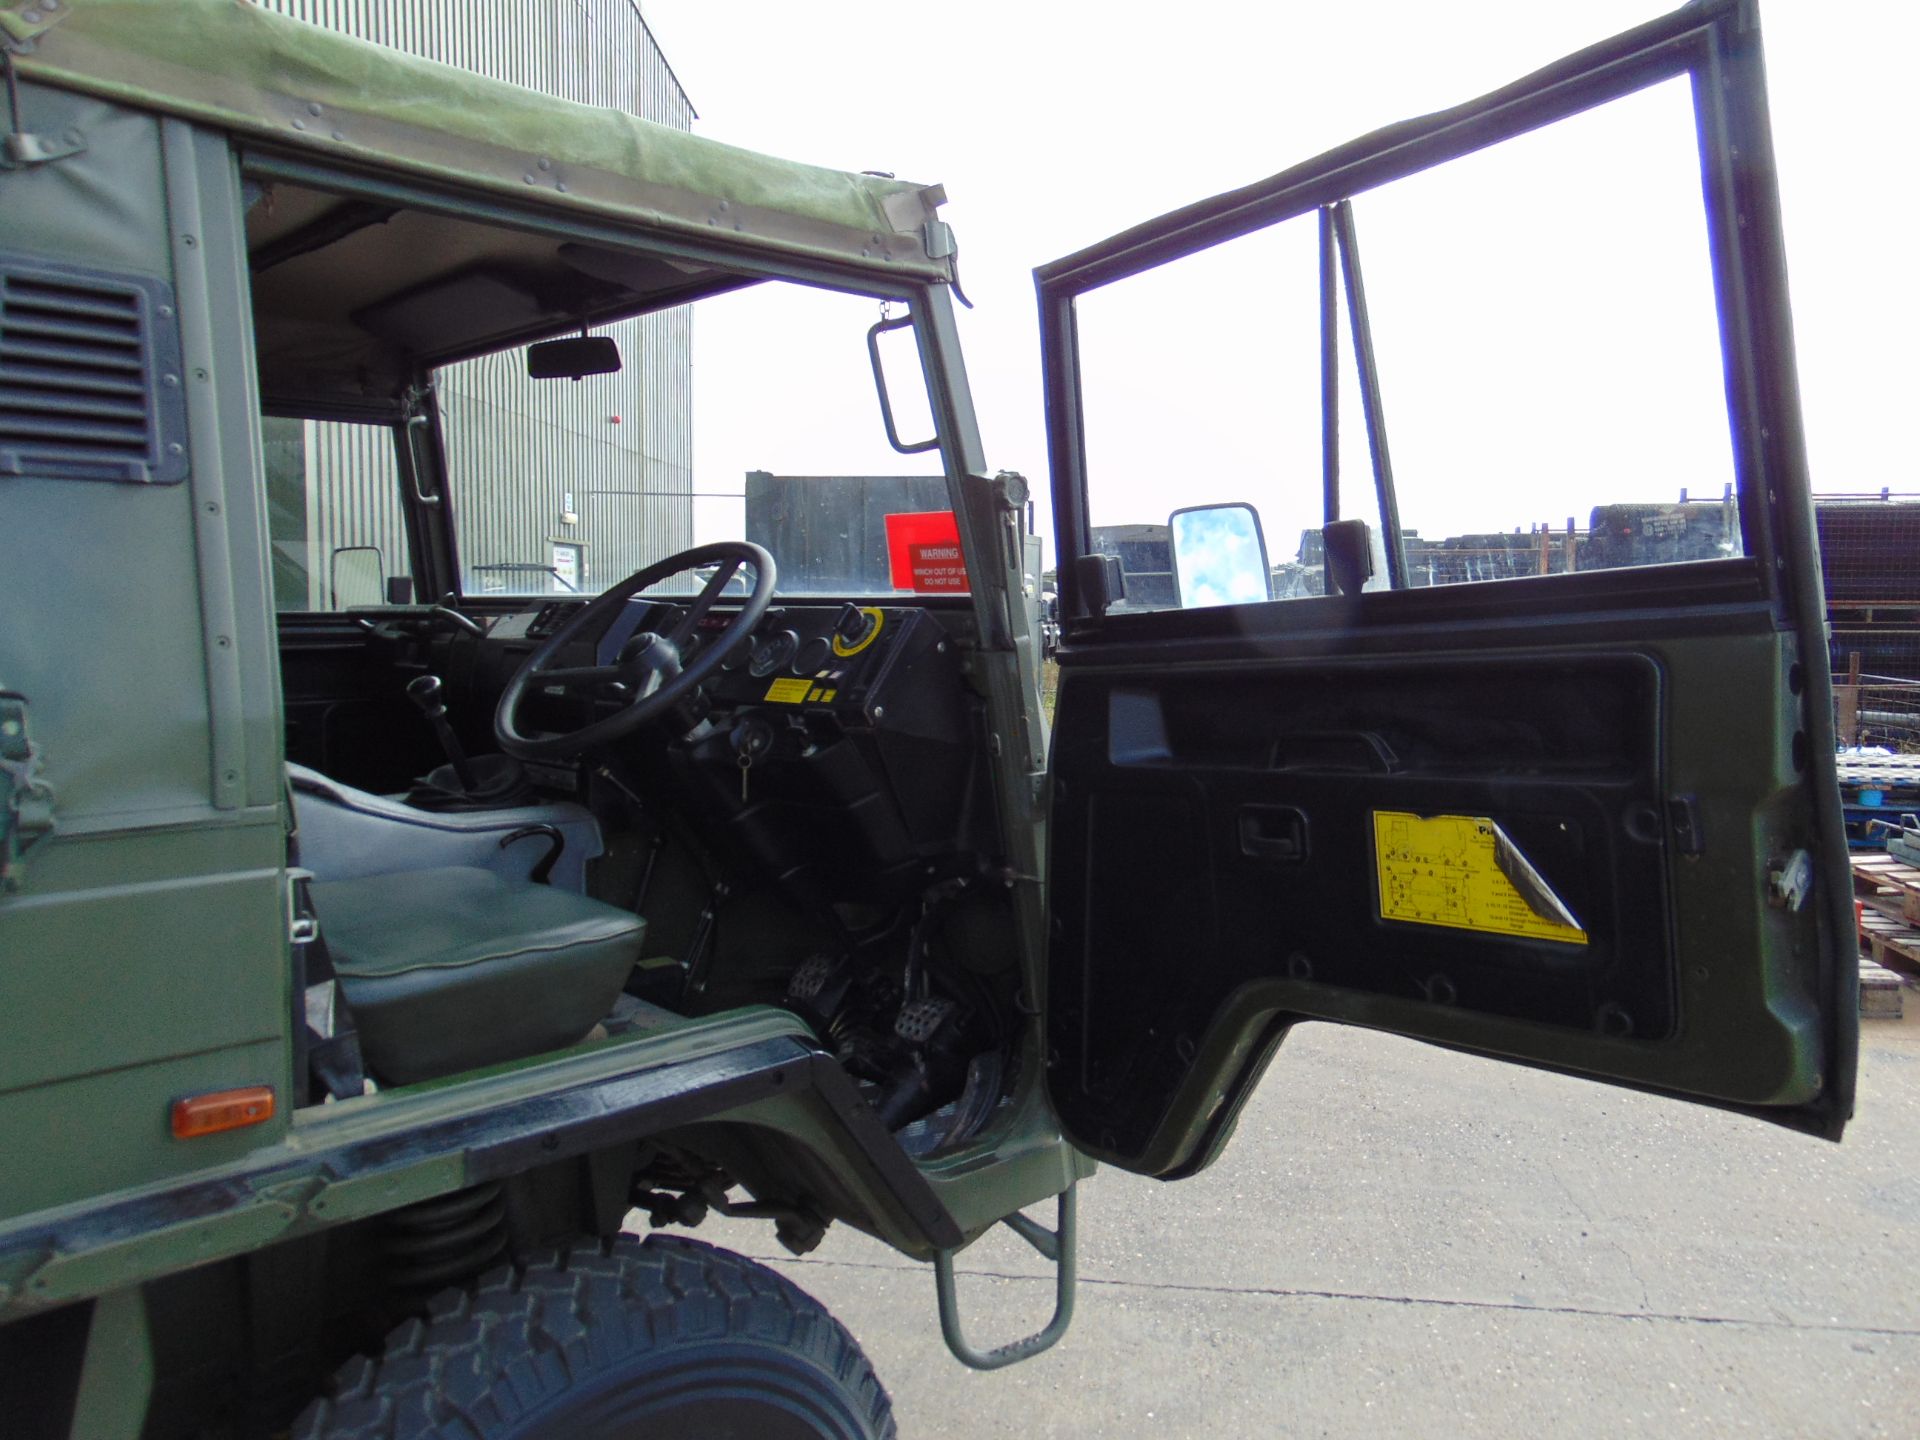 Military Specification Pinzgauer 716 4X4 Soft Top ONLY 26,686 MILES! - Image 23 of 37